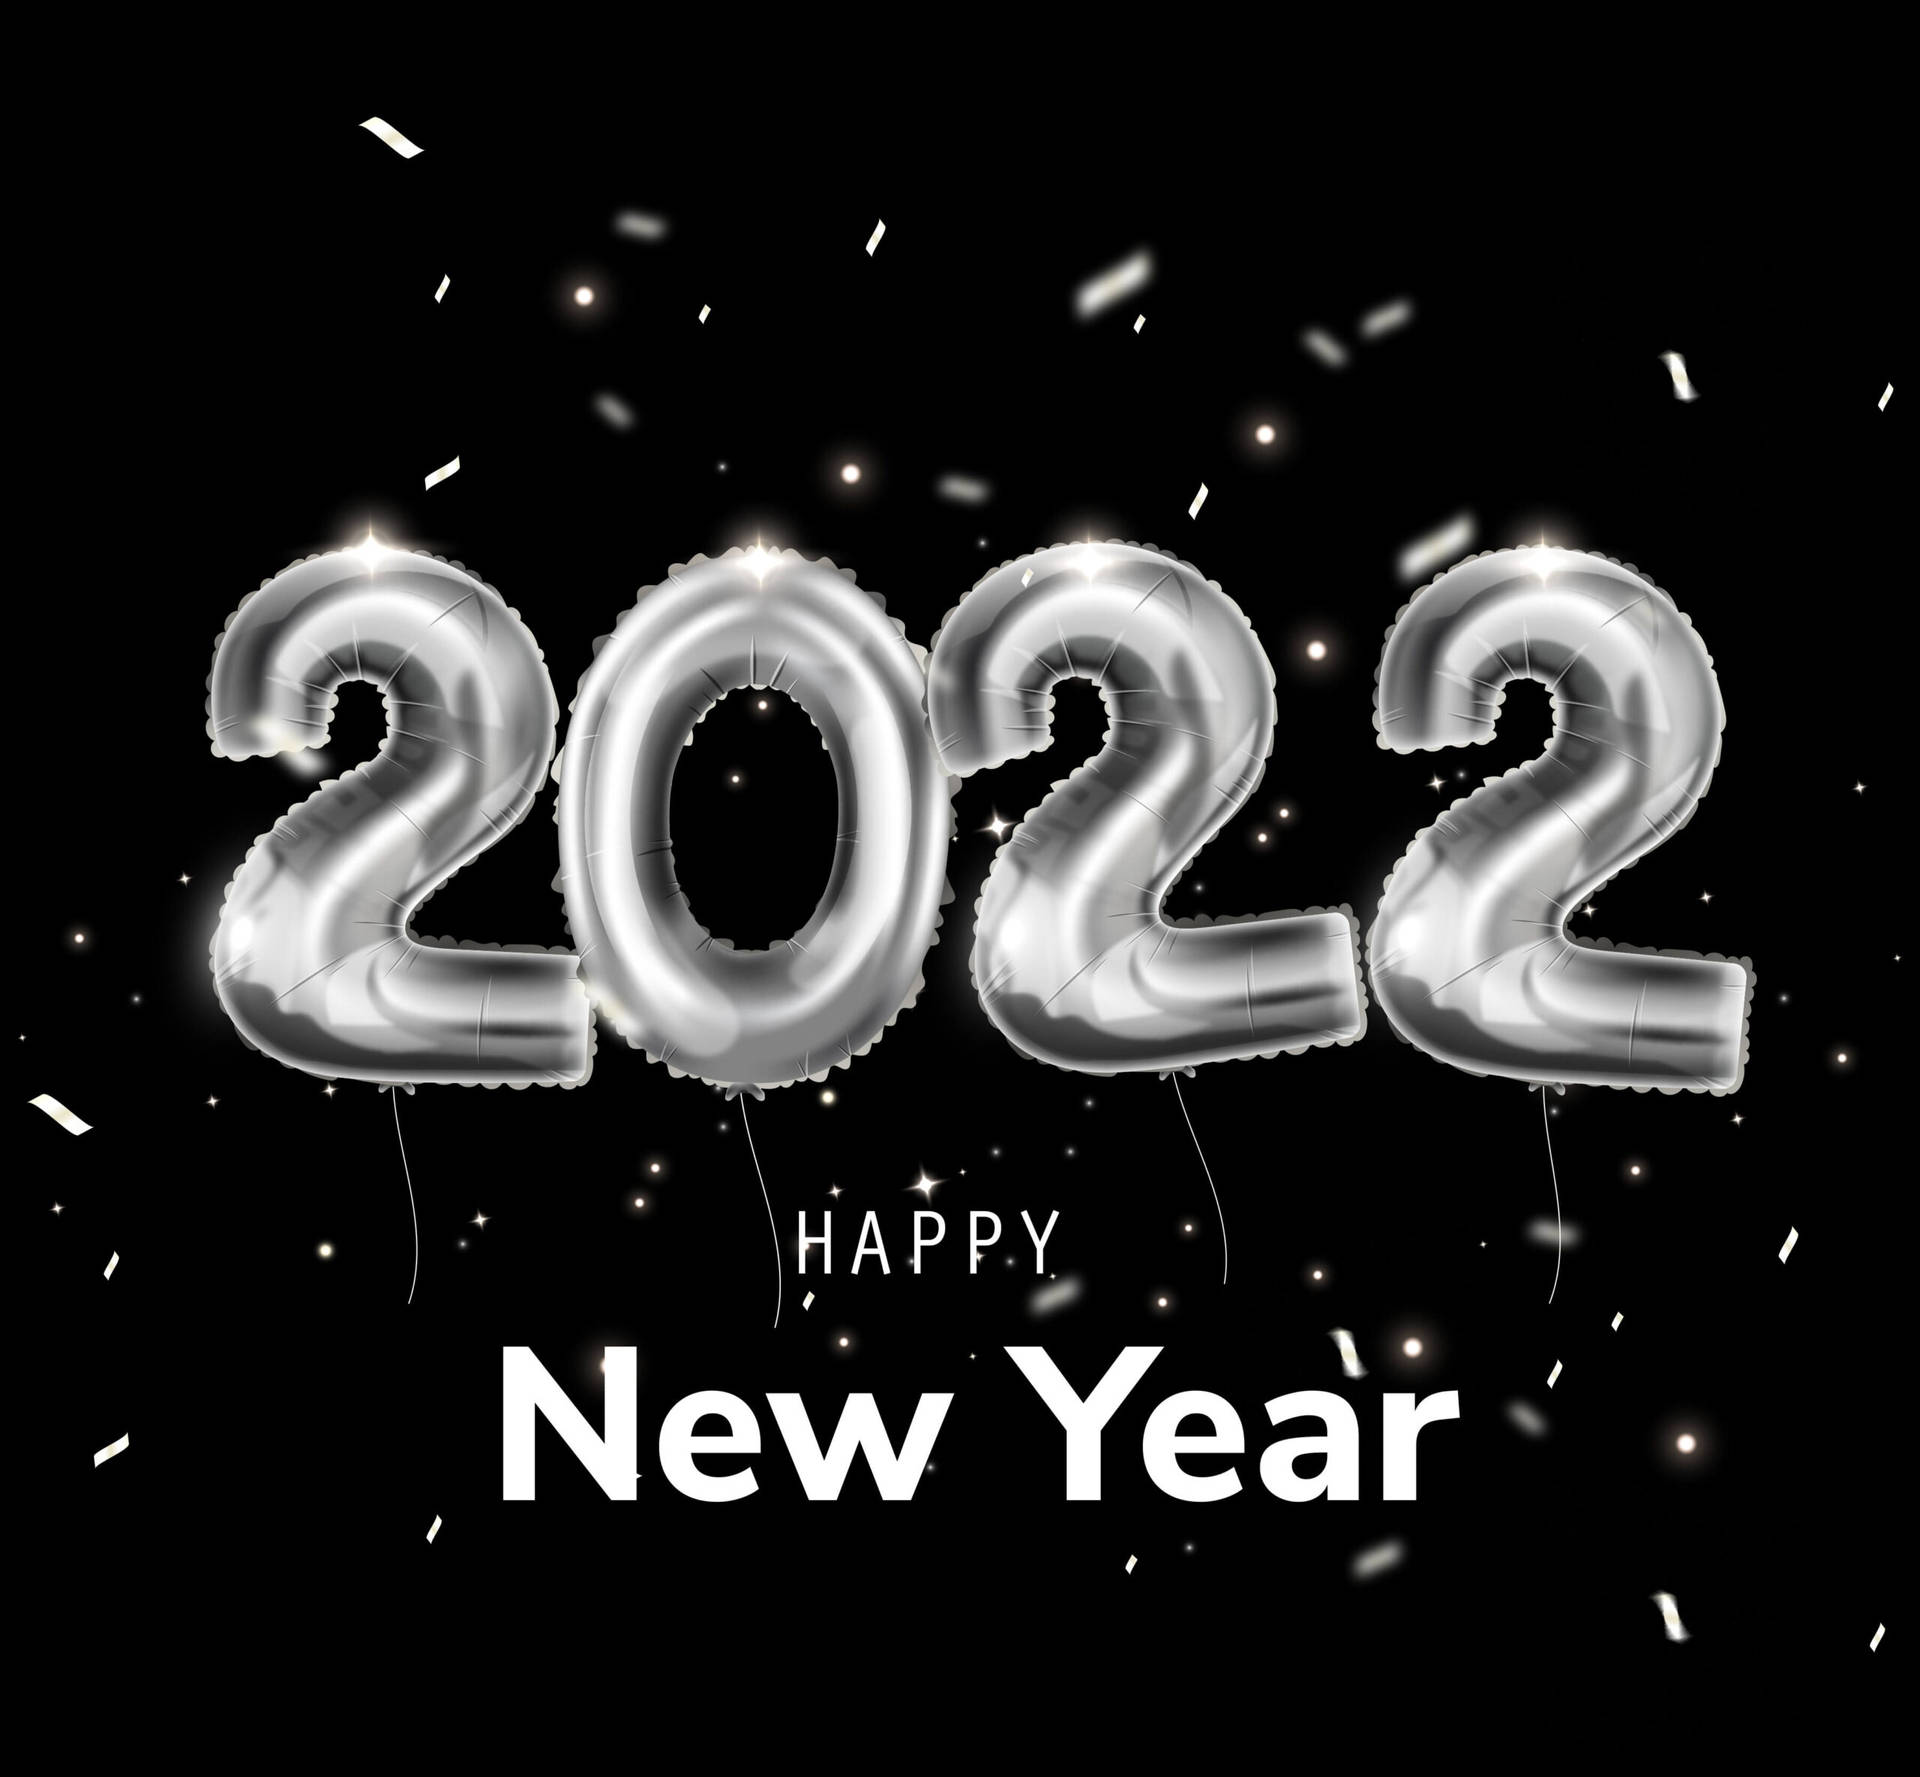 Happy New Year 2022 Silver Balloons Background